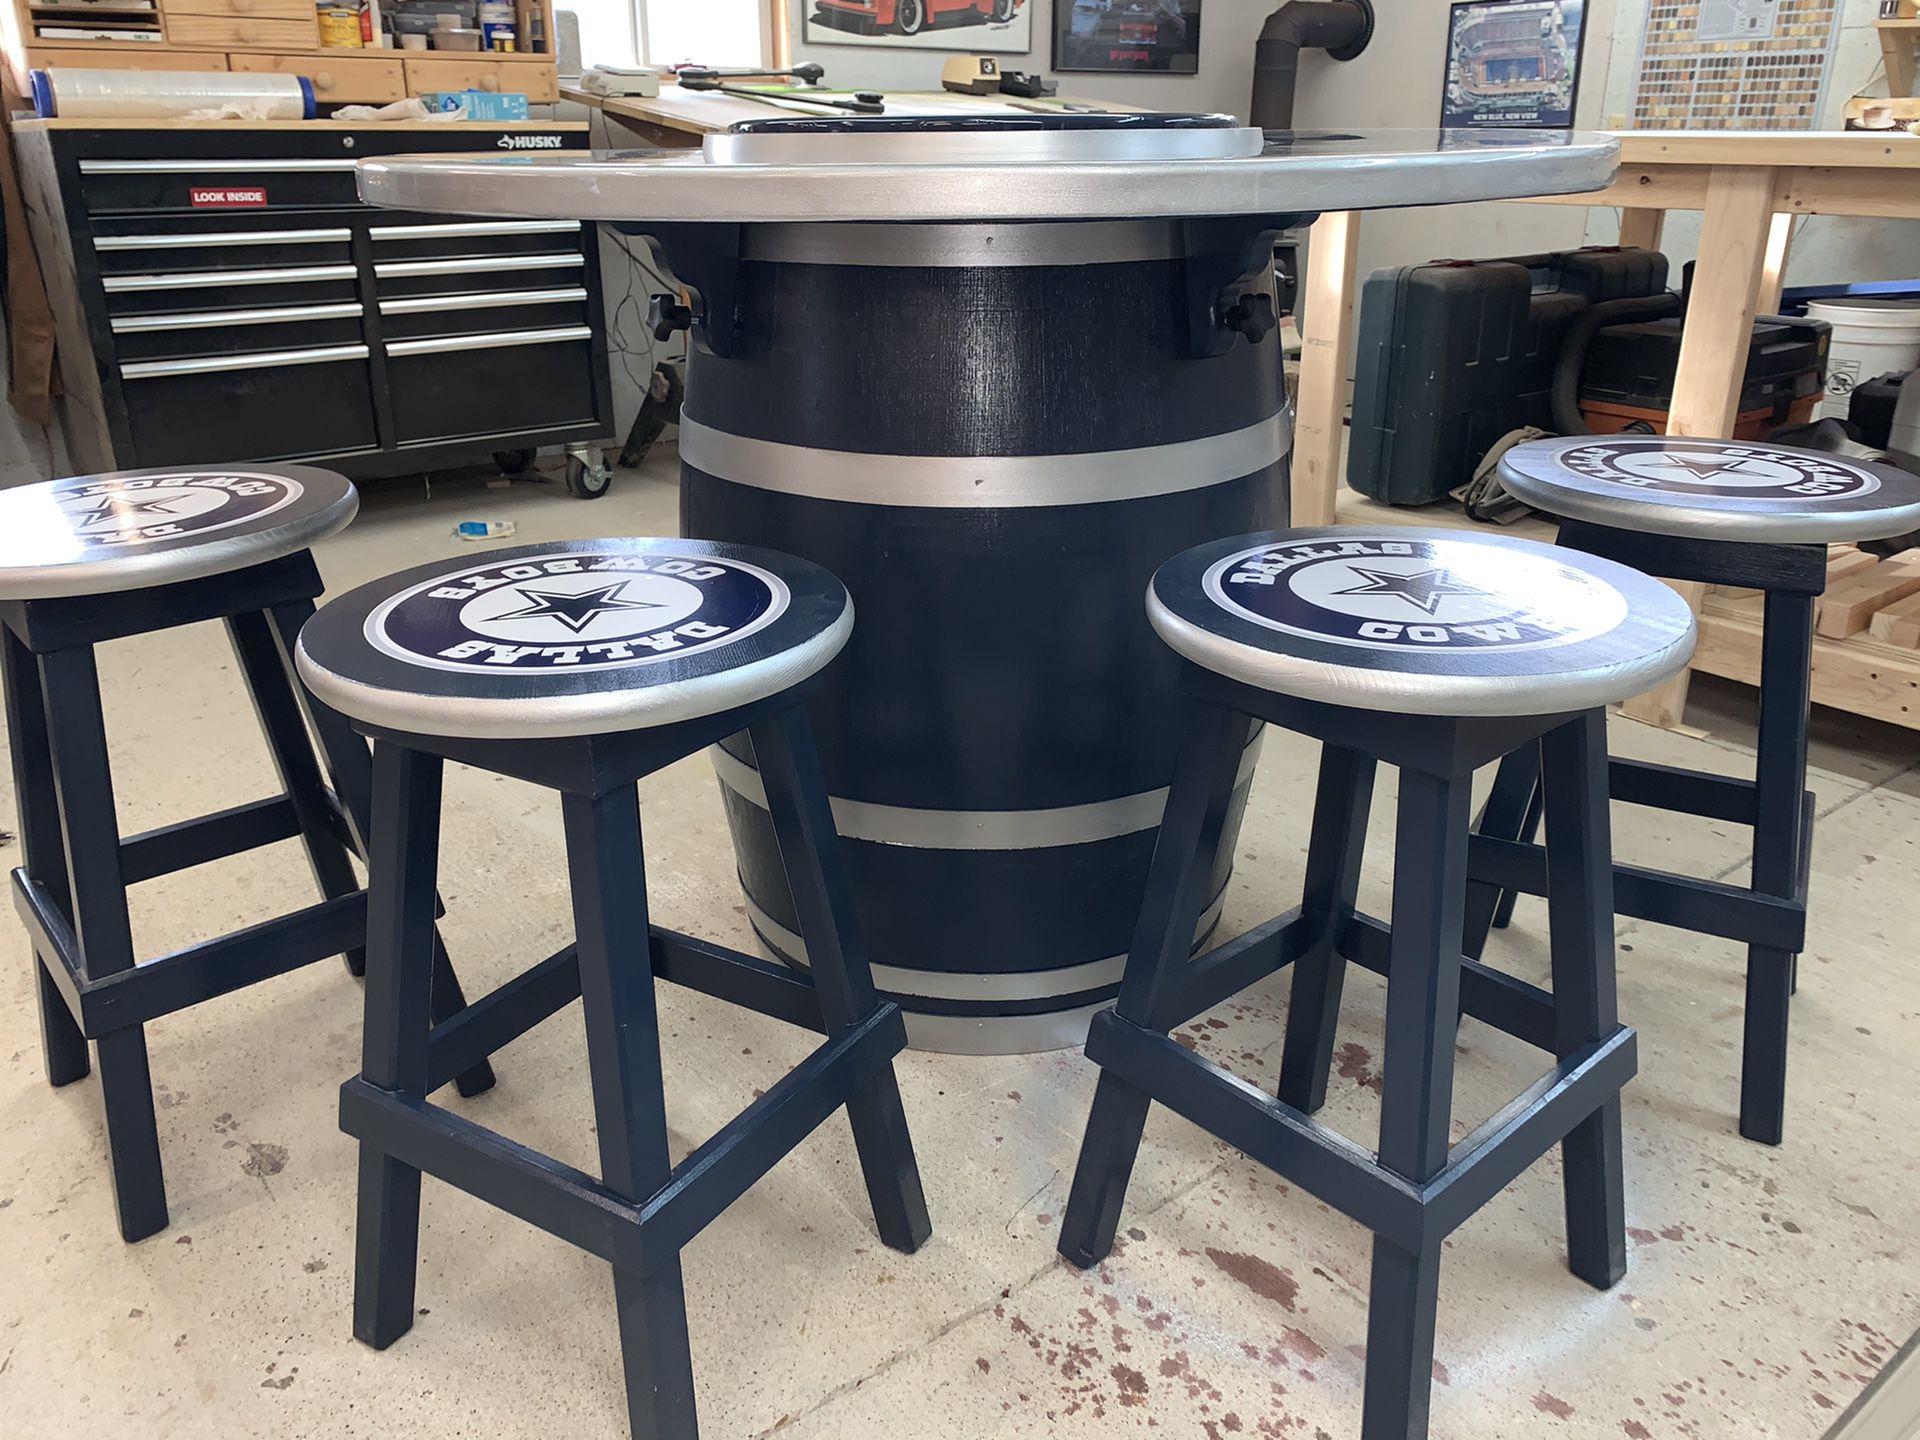 Dallas Cowboys wine barrel table and chair set